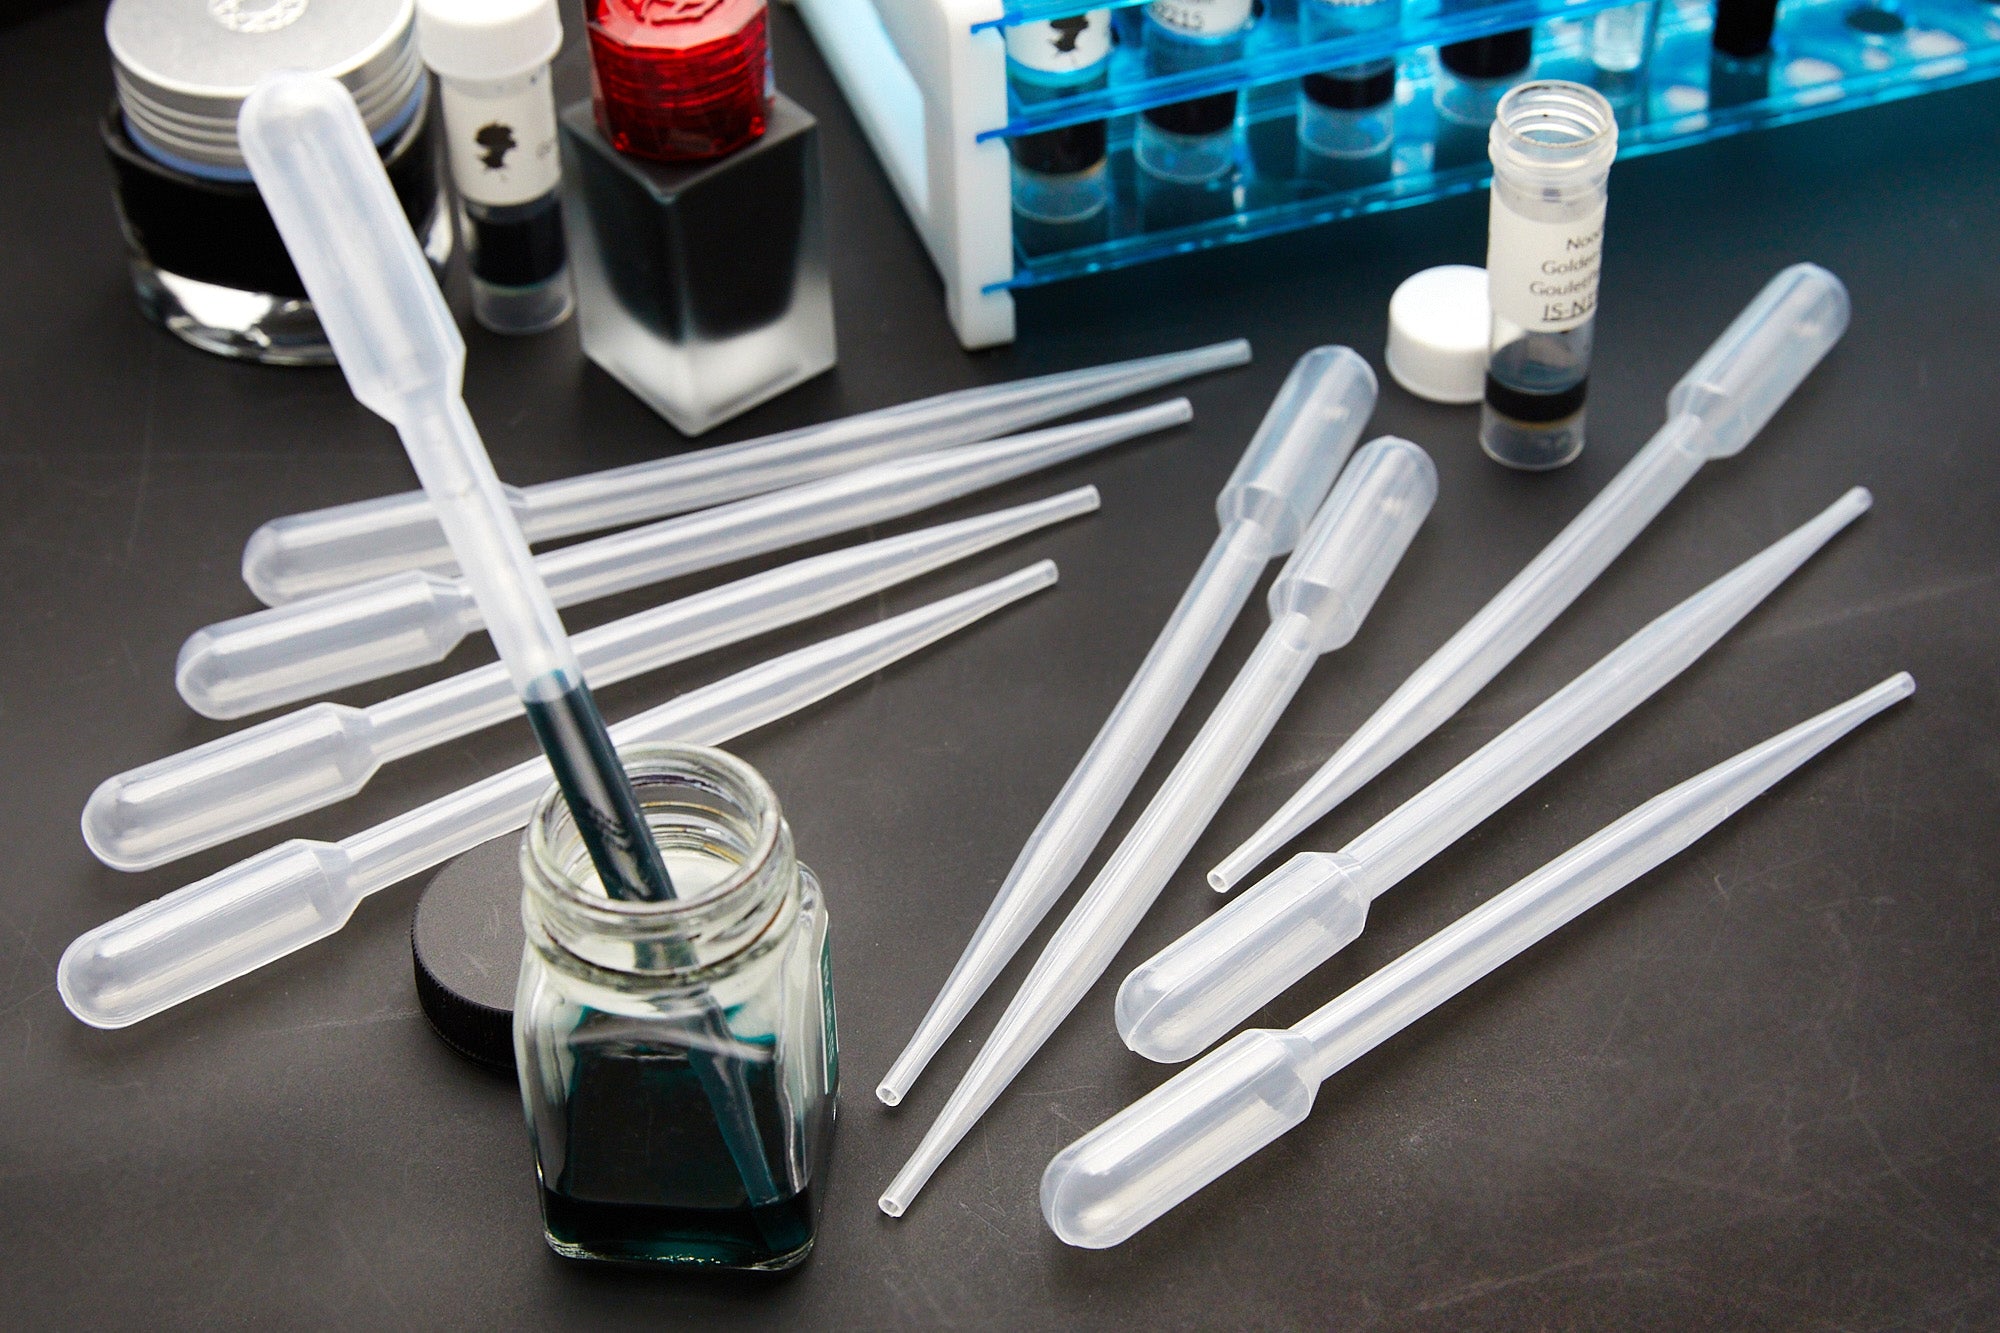 Goulet Transfer Pipettes - one inserted into a bottle of ink, standing upright, the rest empty and on a gray desk background